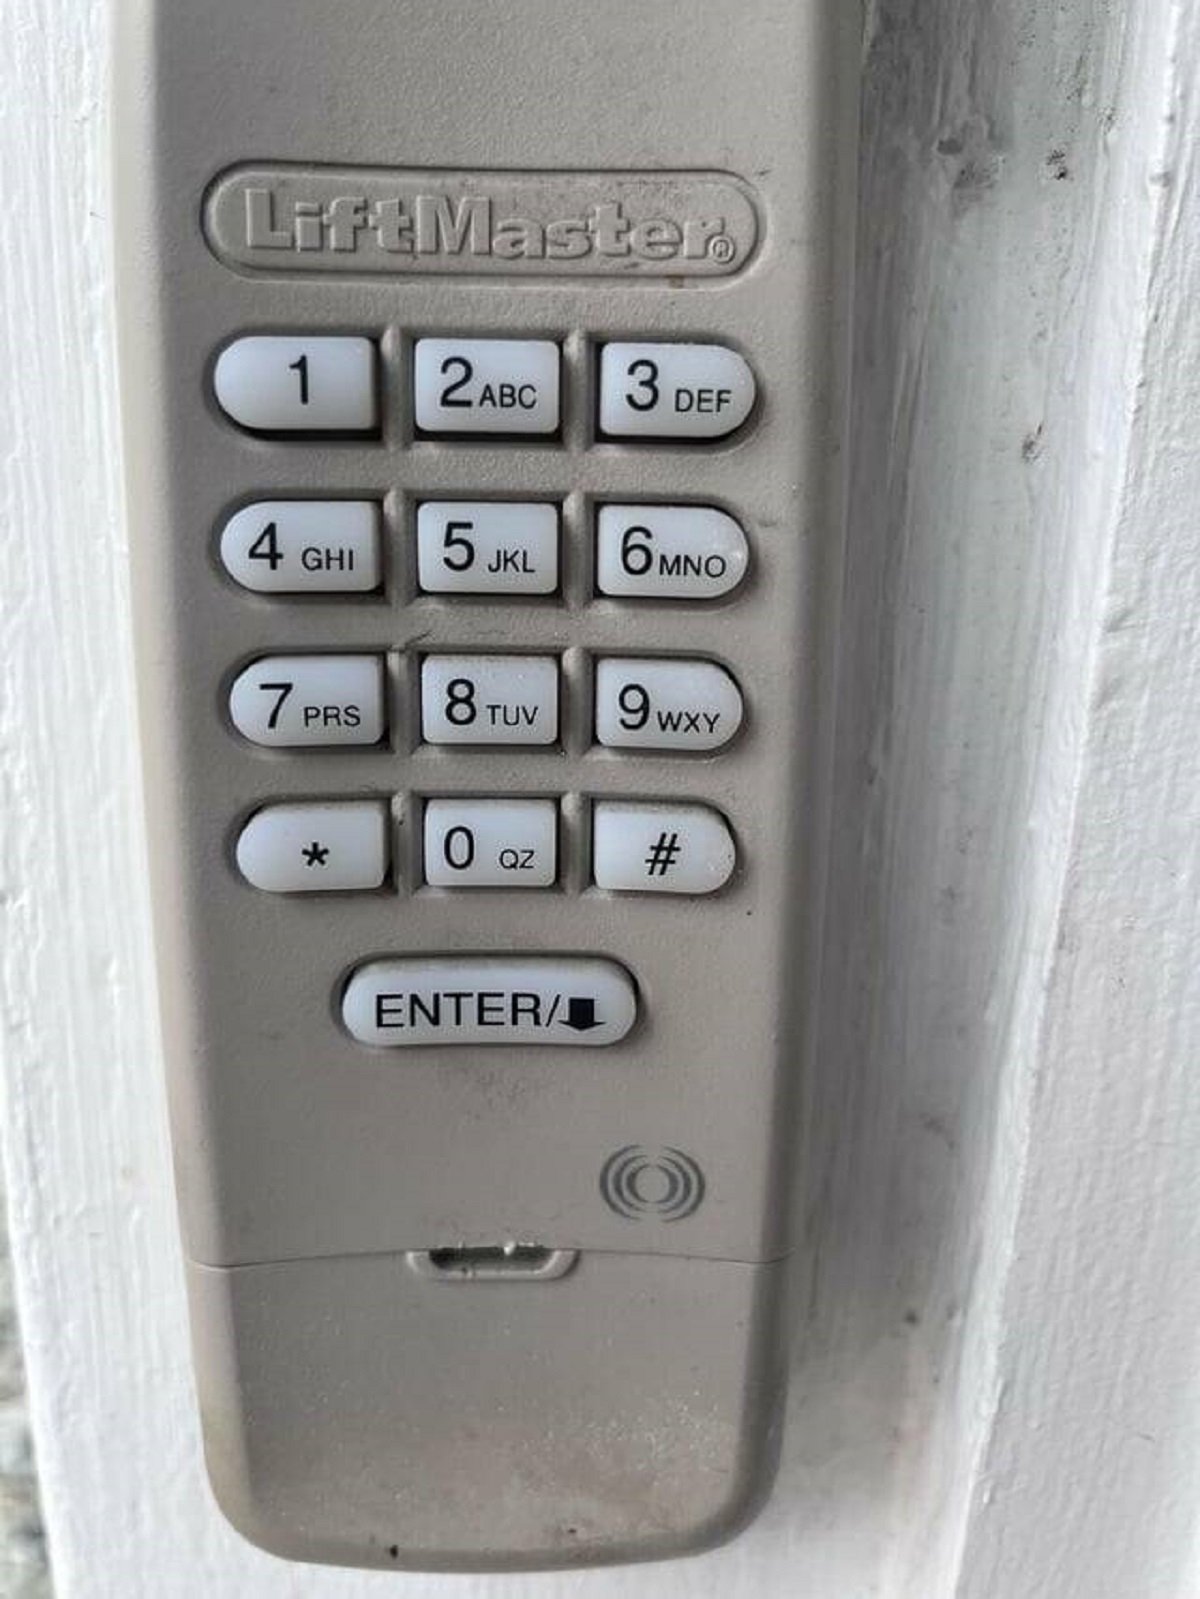 "The placement of the Q on our garage door opener."